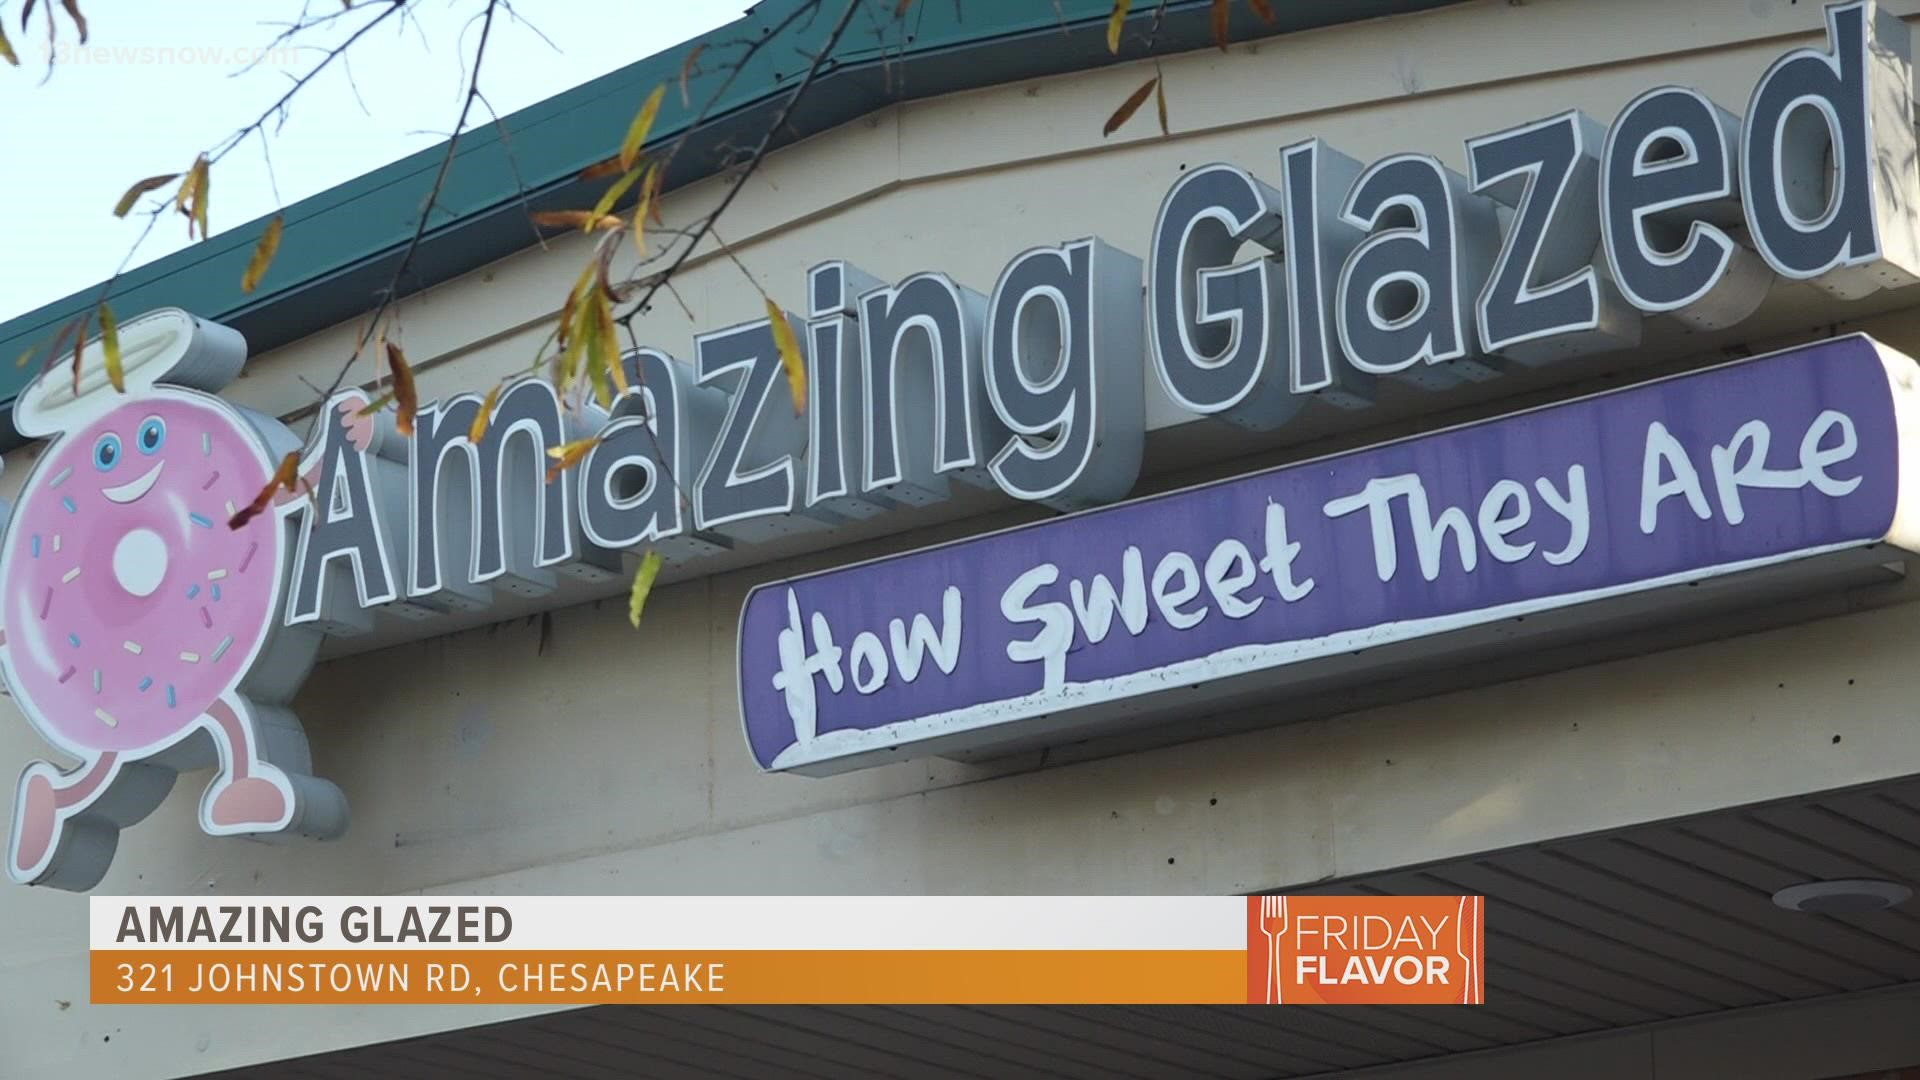 Amazing Glazed sells donuts in Chesapeake, Virginia. The owners want to sprinkle a little faith through each donut.